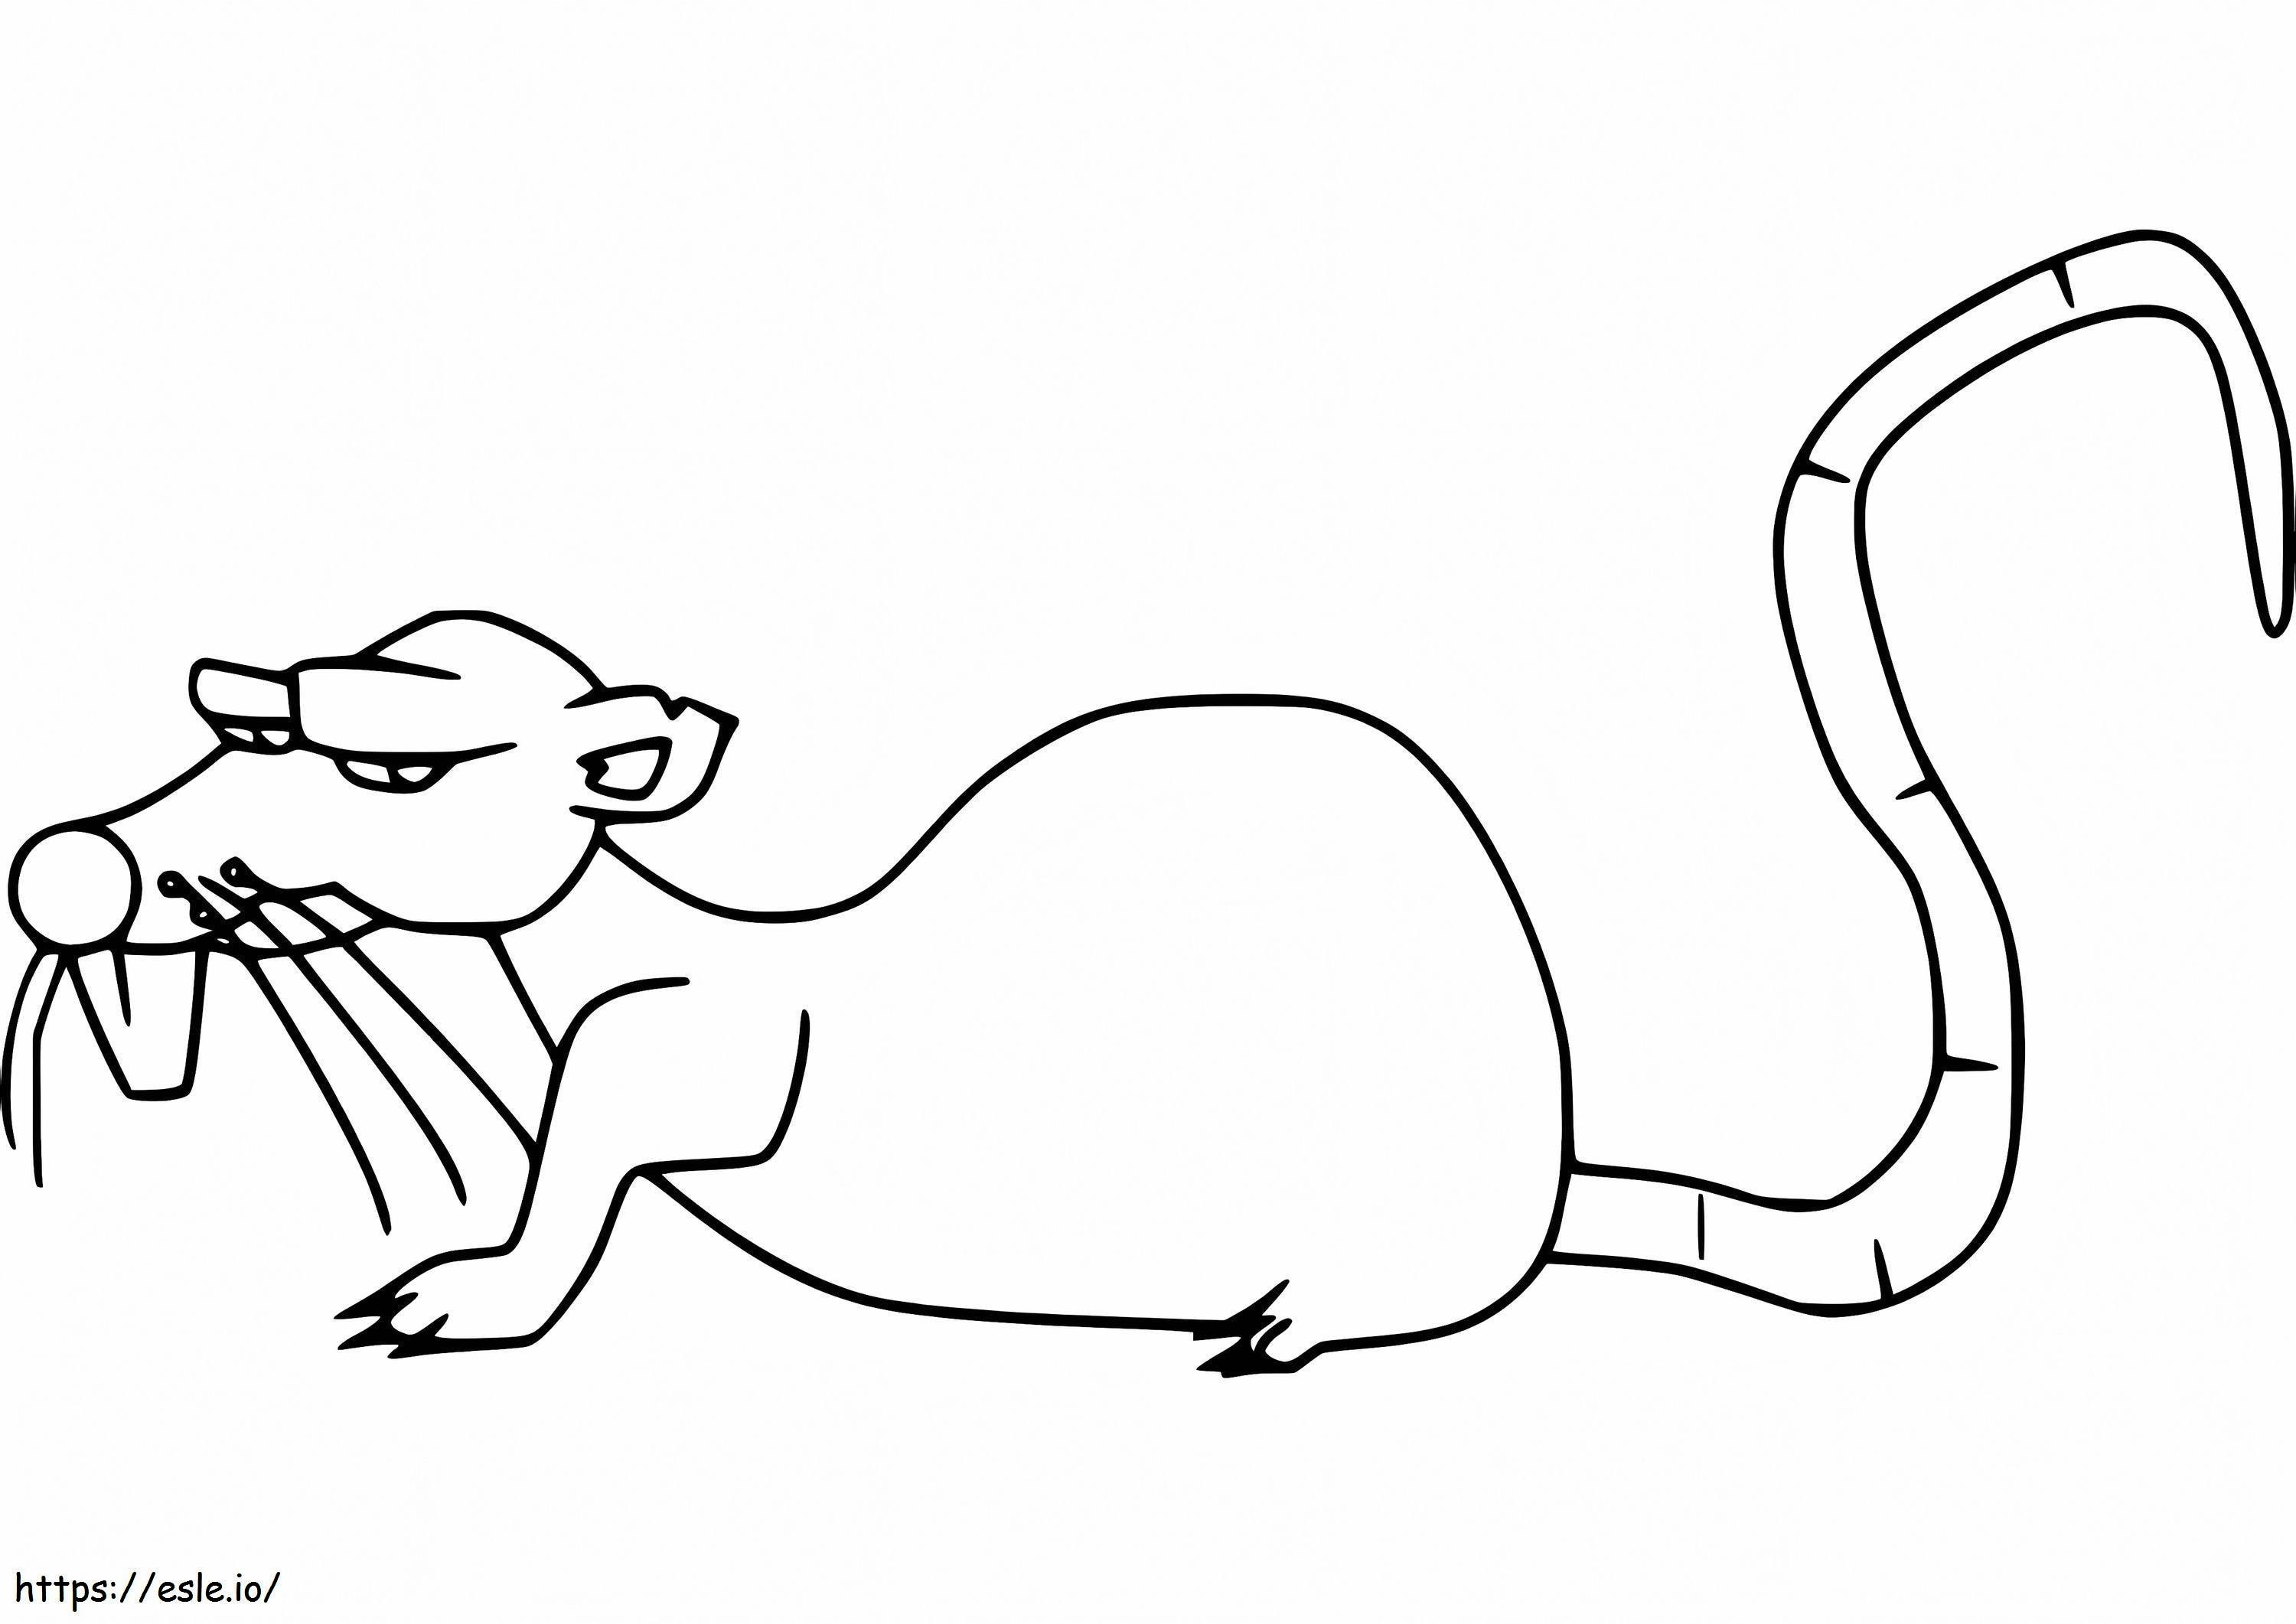 Bad Rat coloring page